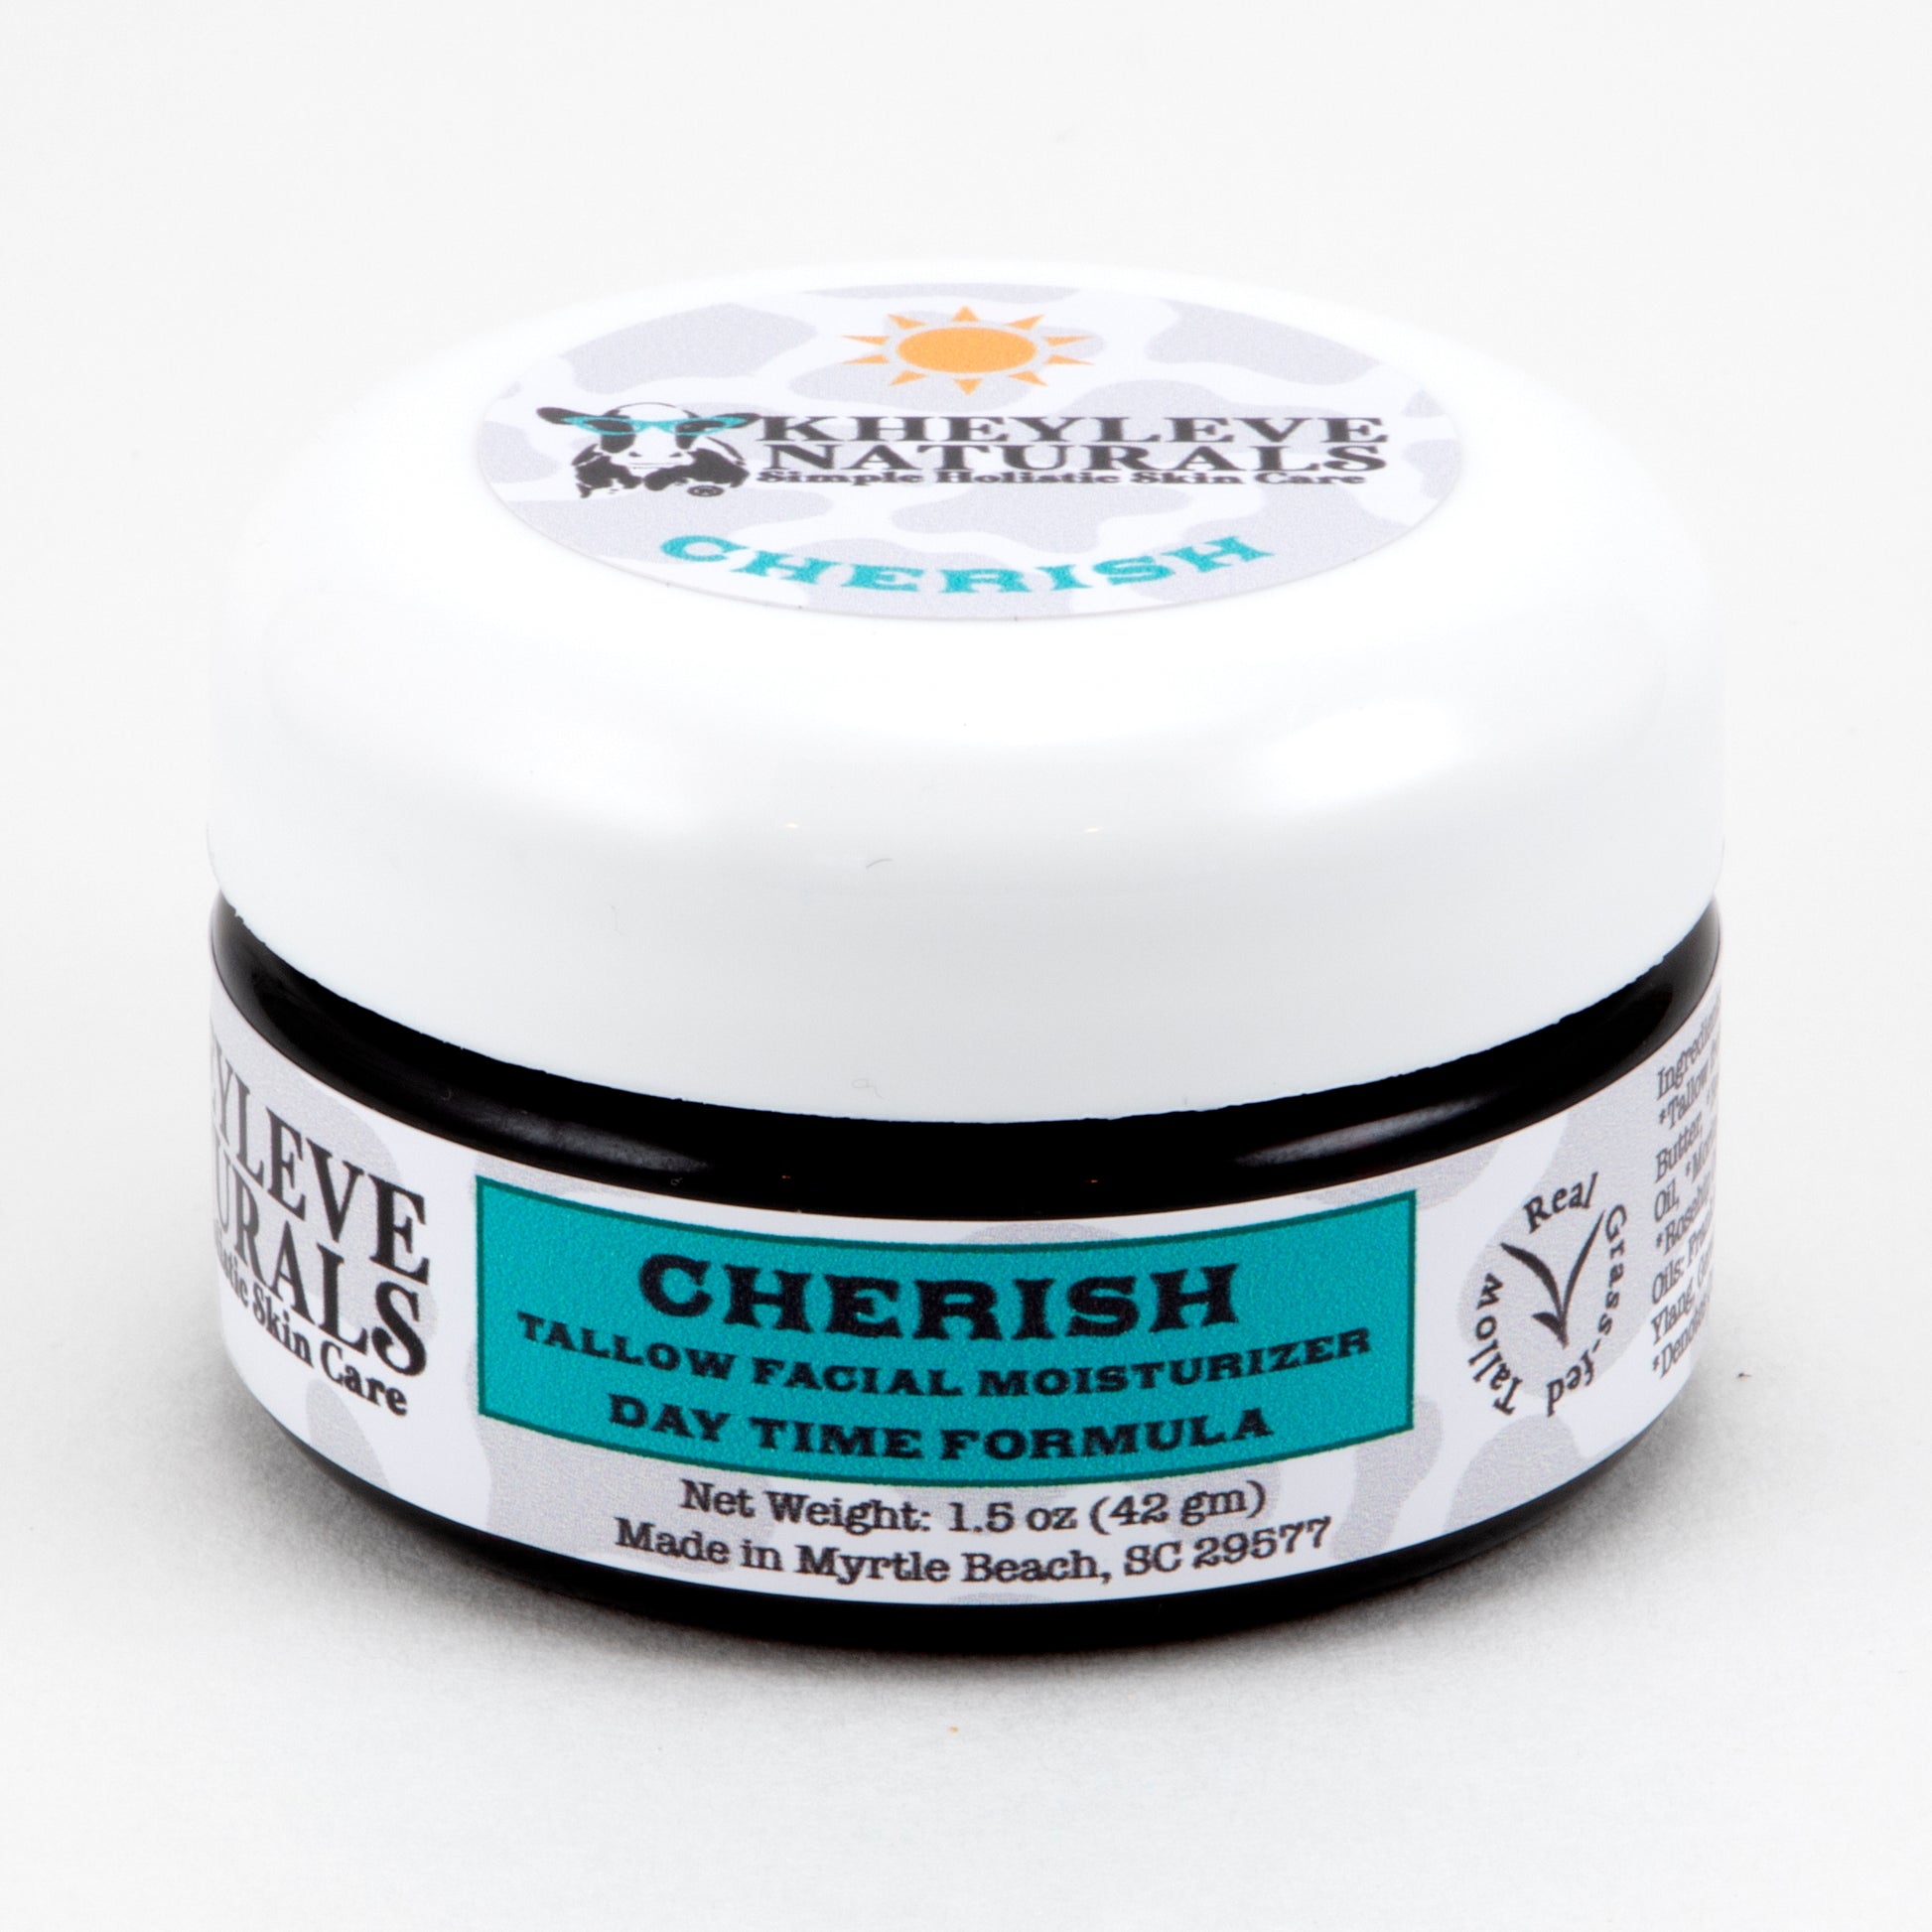 Cherish Daytime Moisturizer leaves your skin hydrated with a protective barrier.